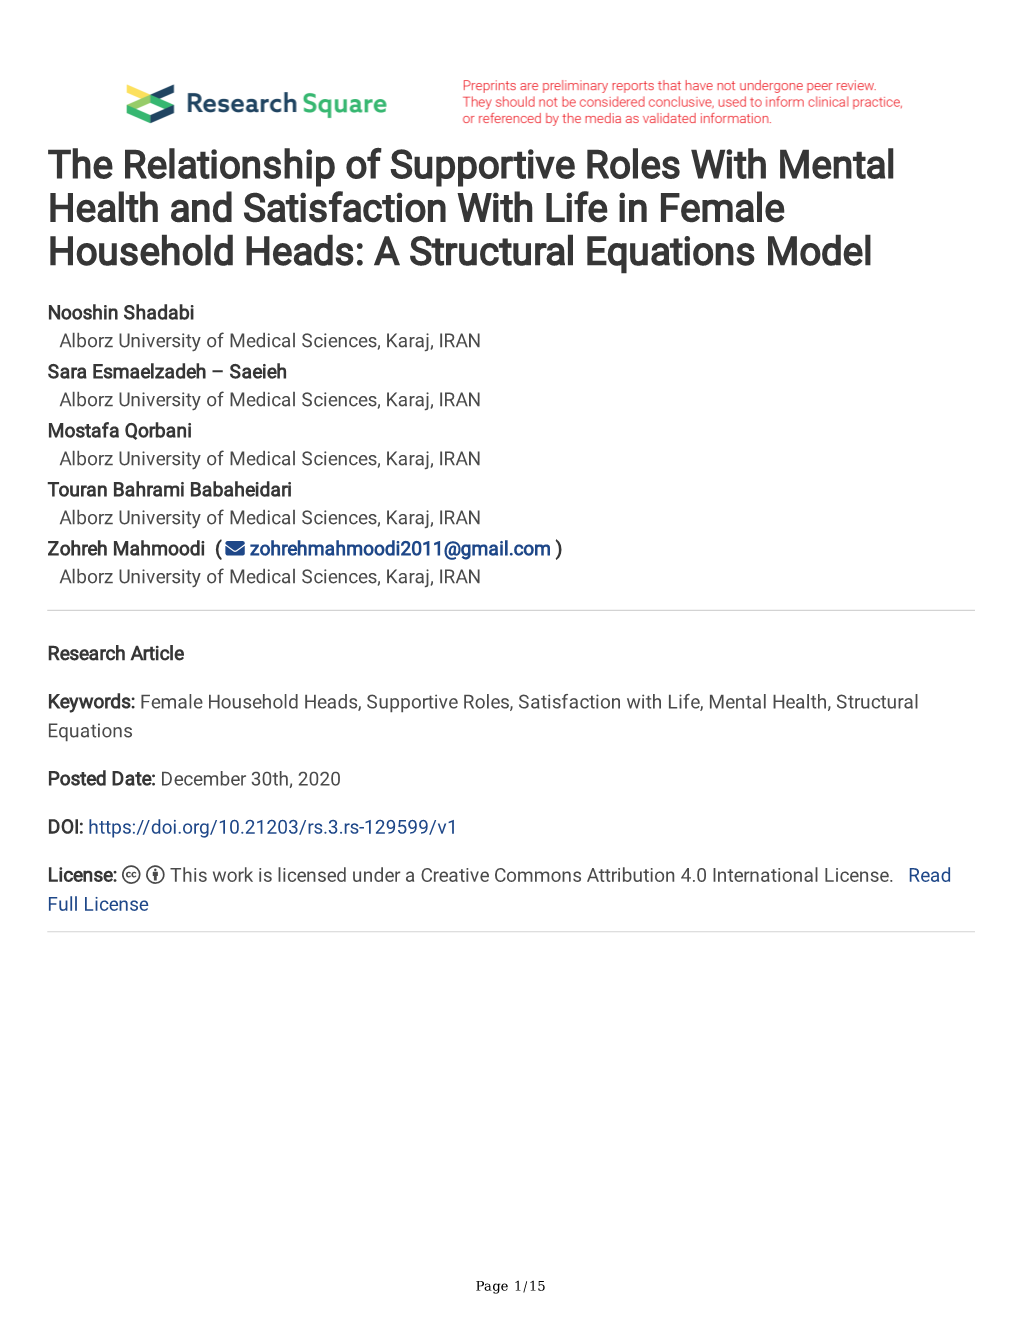 The Relationship of Supportive Roles with Mental Health and Satisfaction with Life in Female Household Heads: a Structural Equations Model